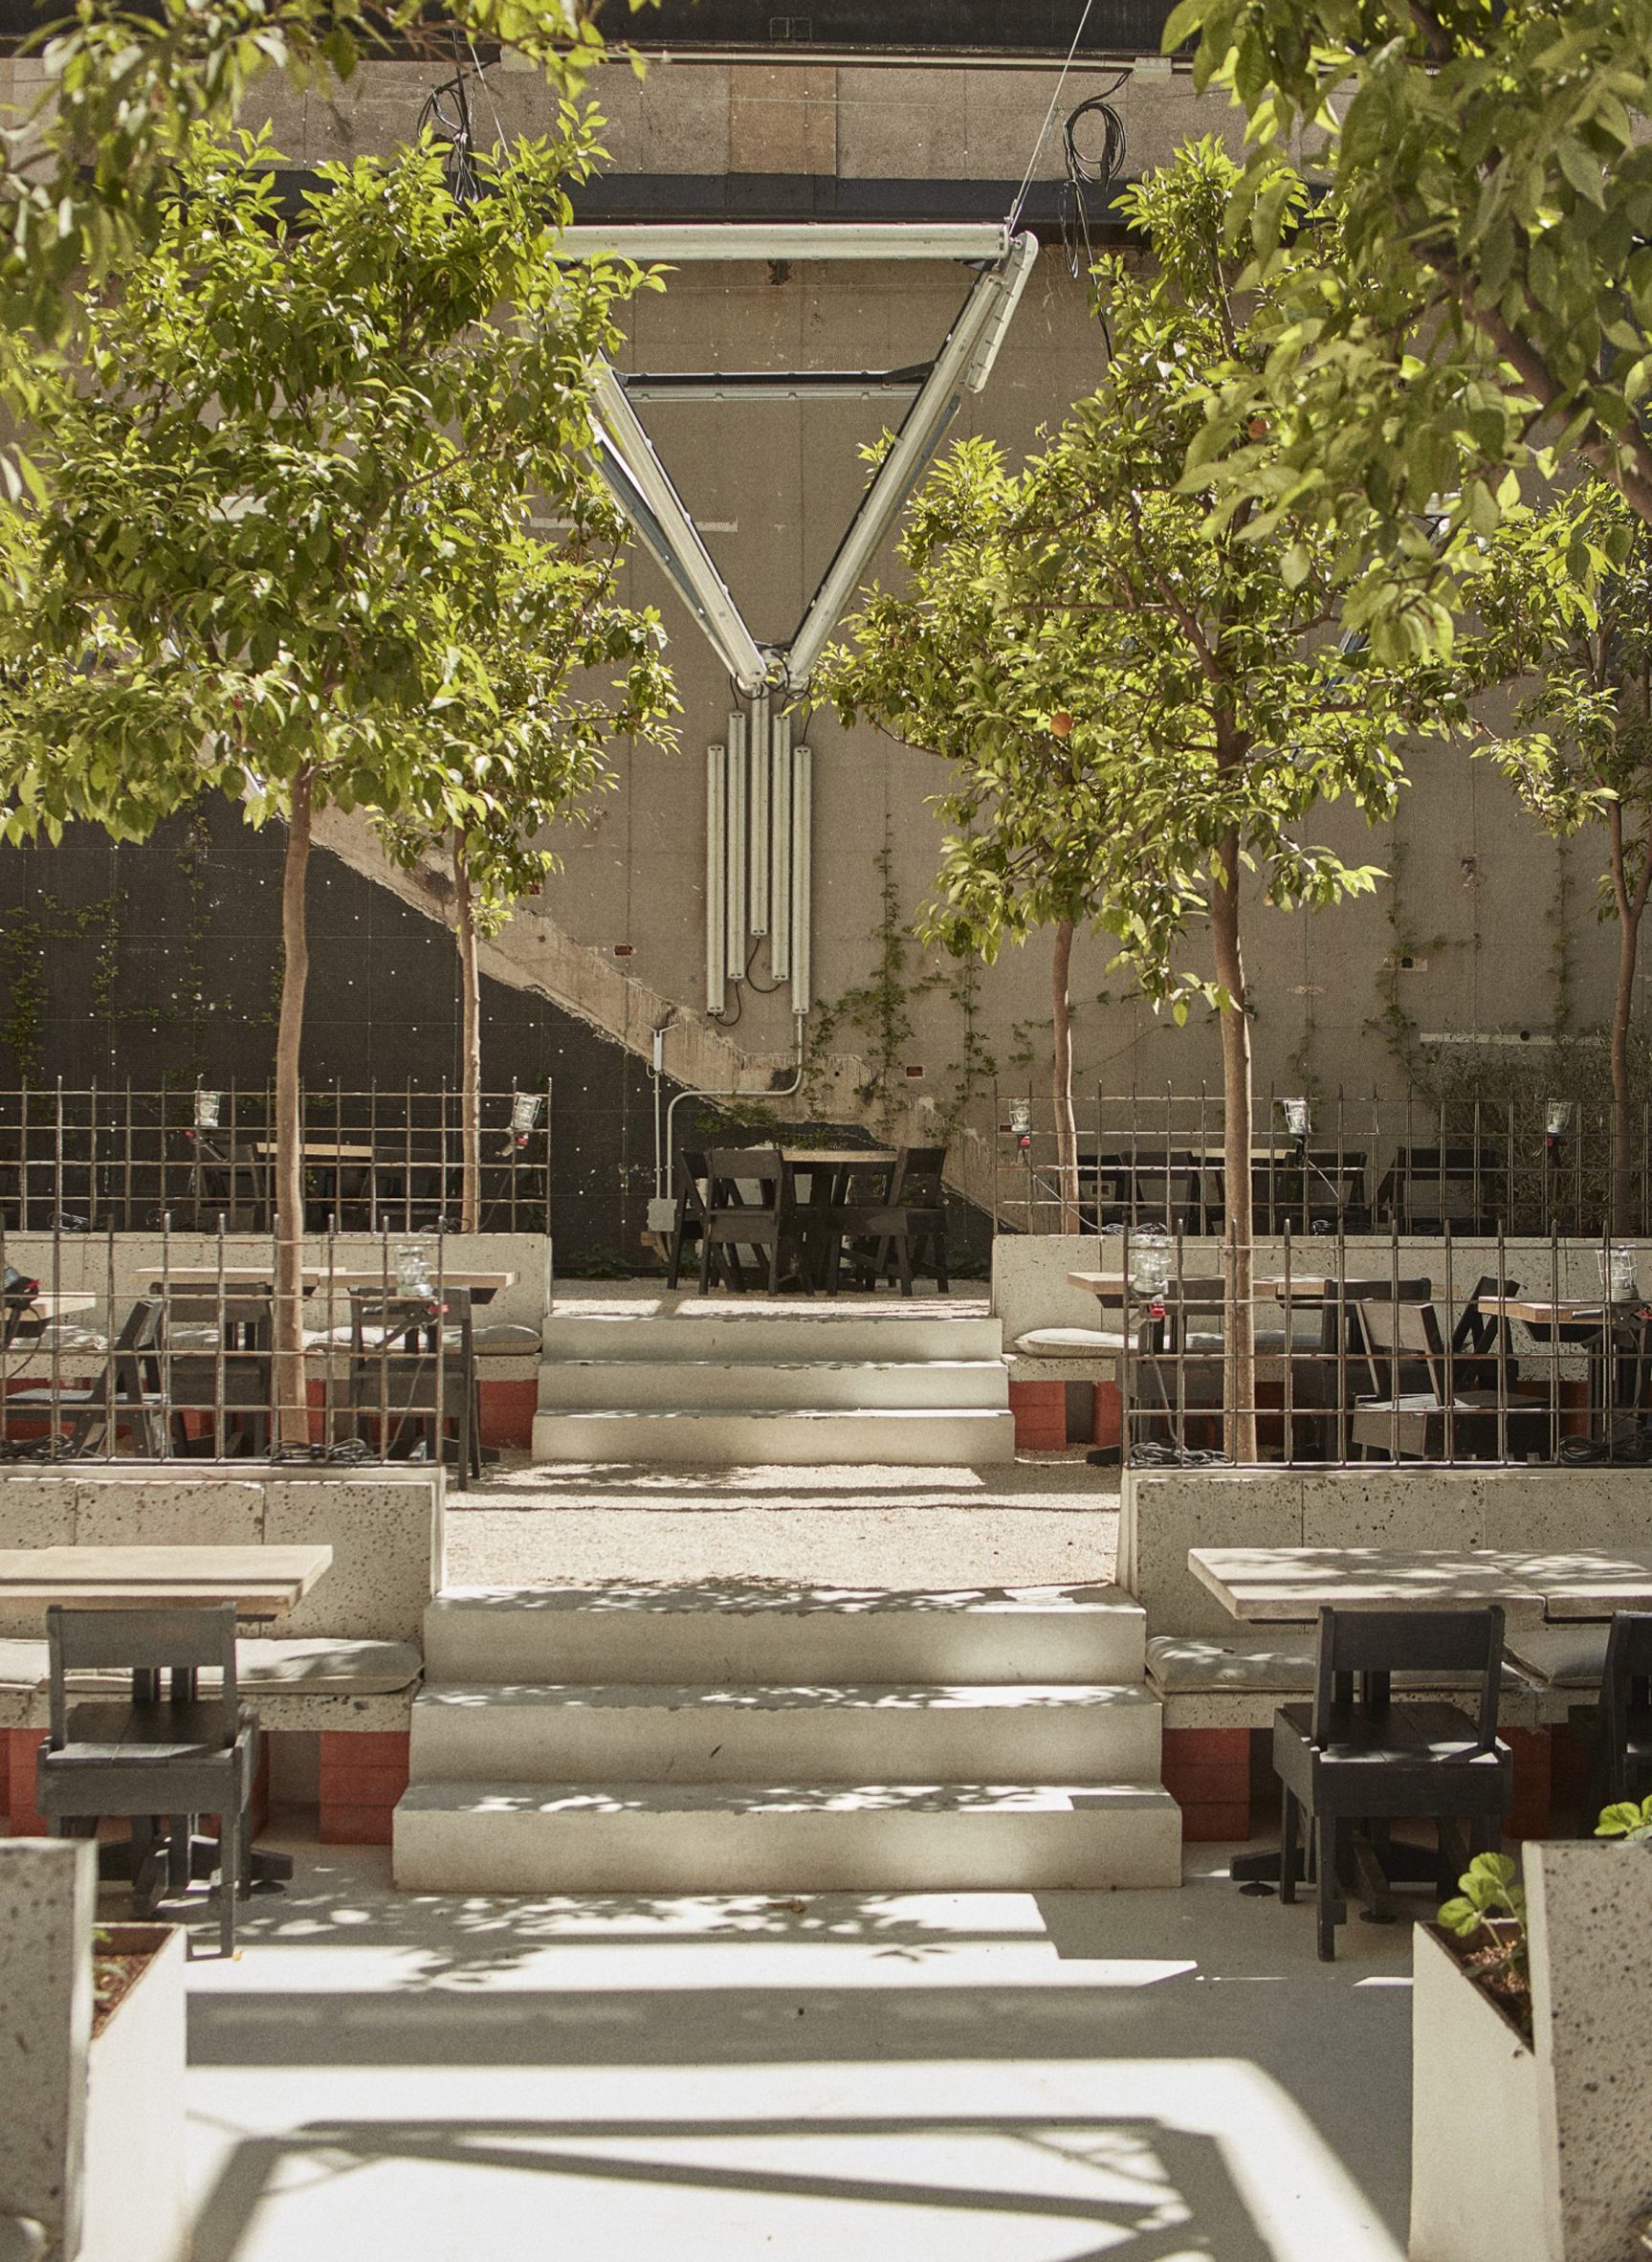 Internal courtyard of Mo de Movimiento with tables, benches and trees